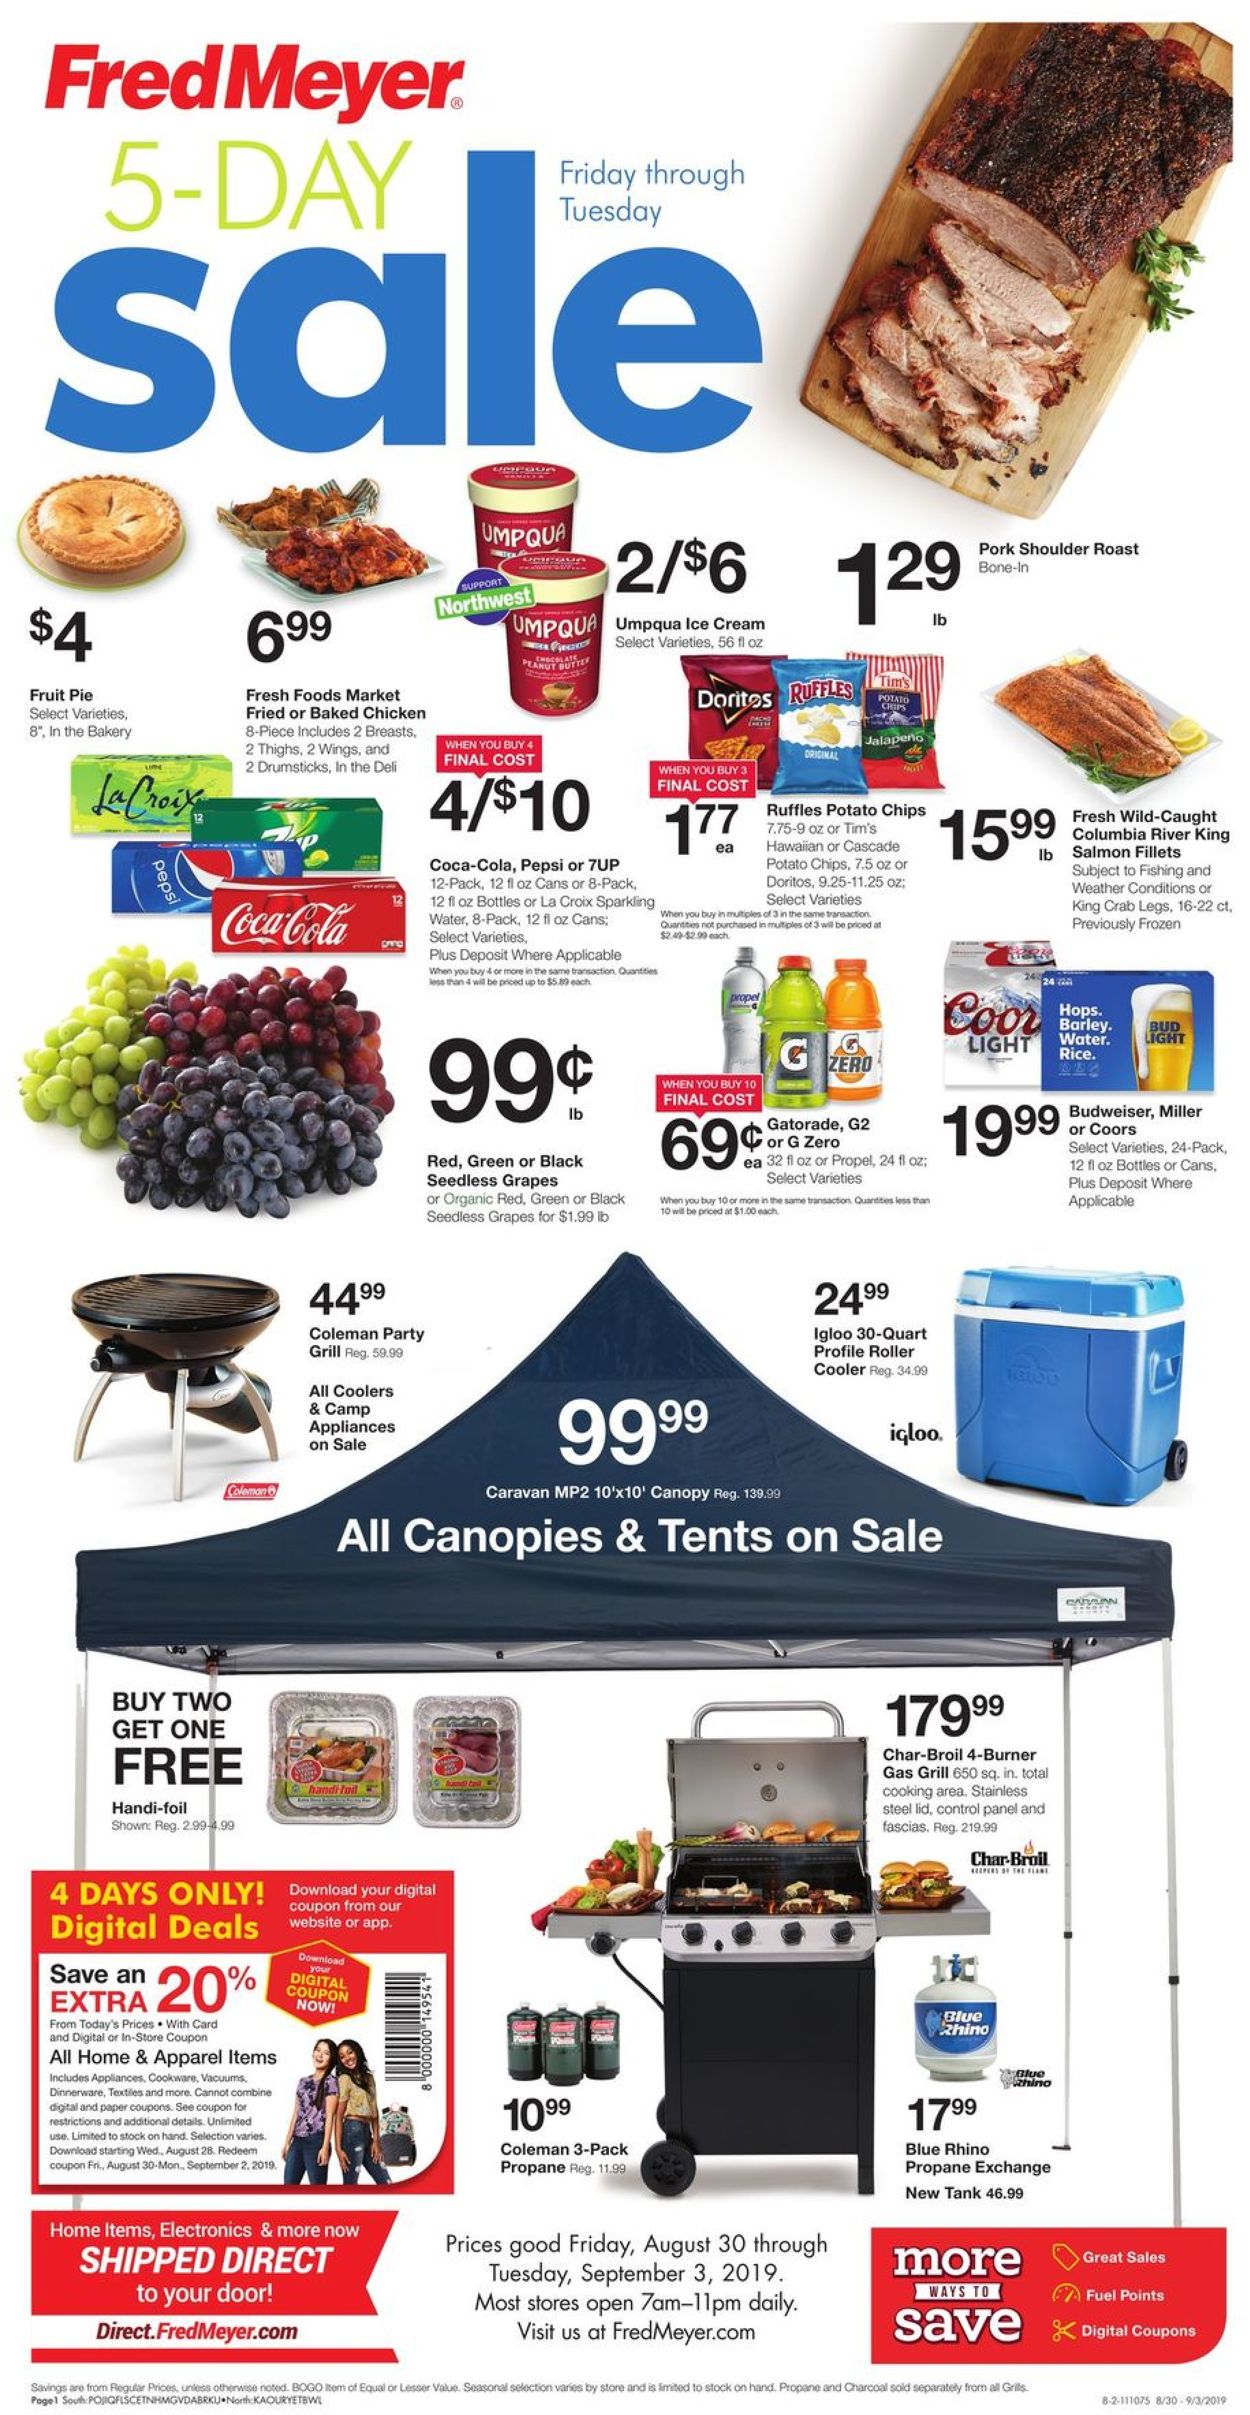 Fred Meyer Current weekly ad 08/30 09/03/2019